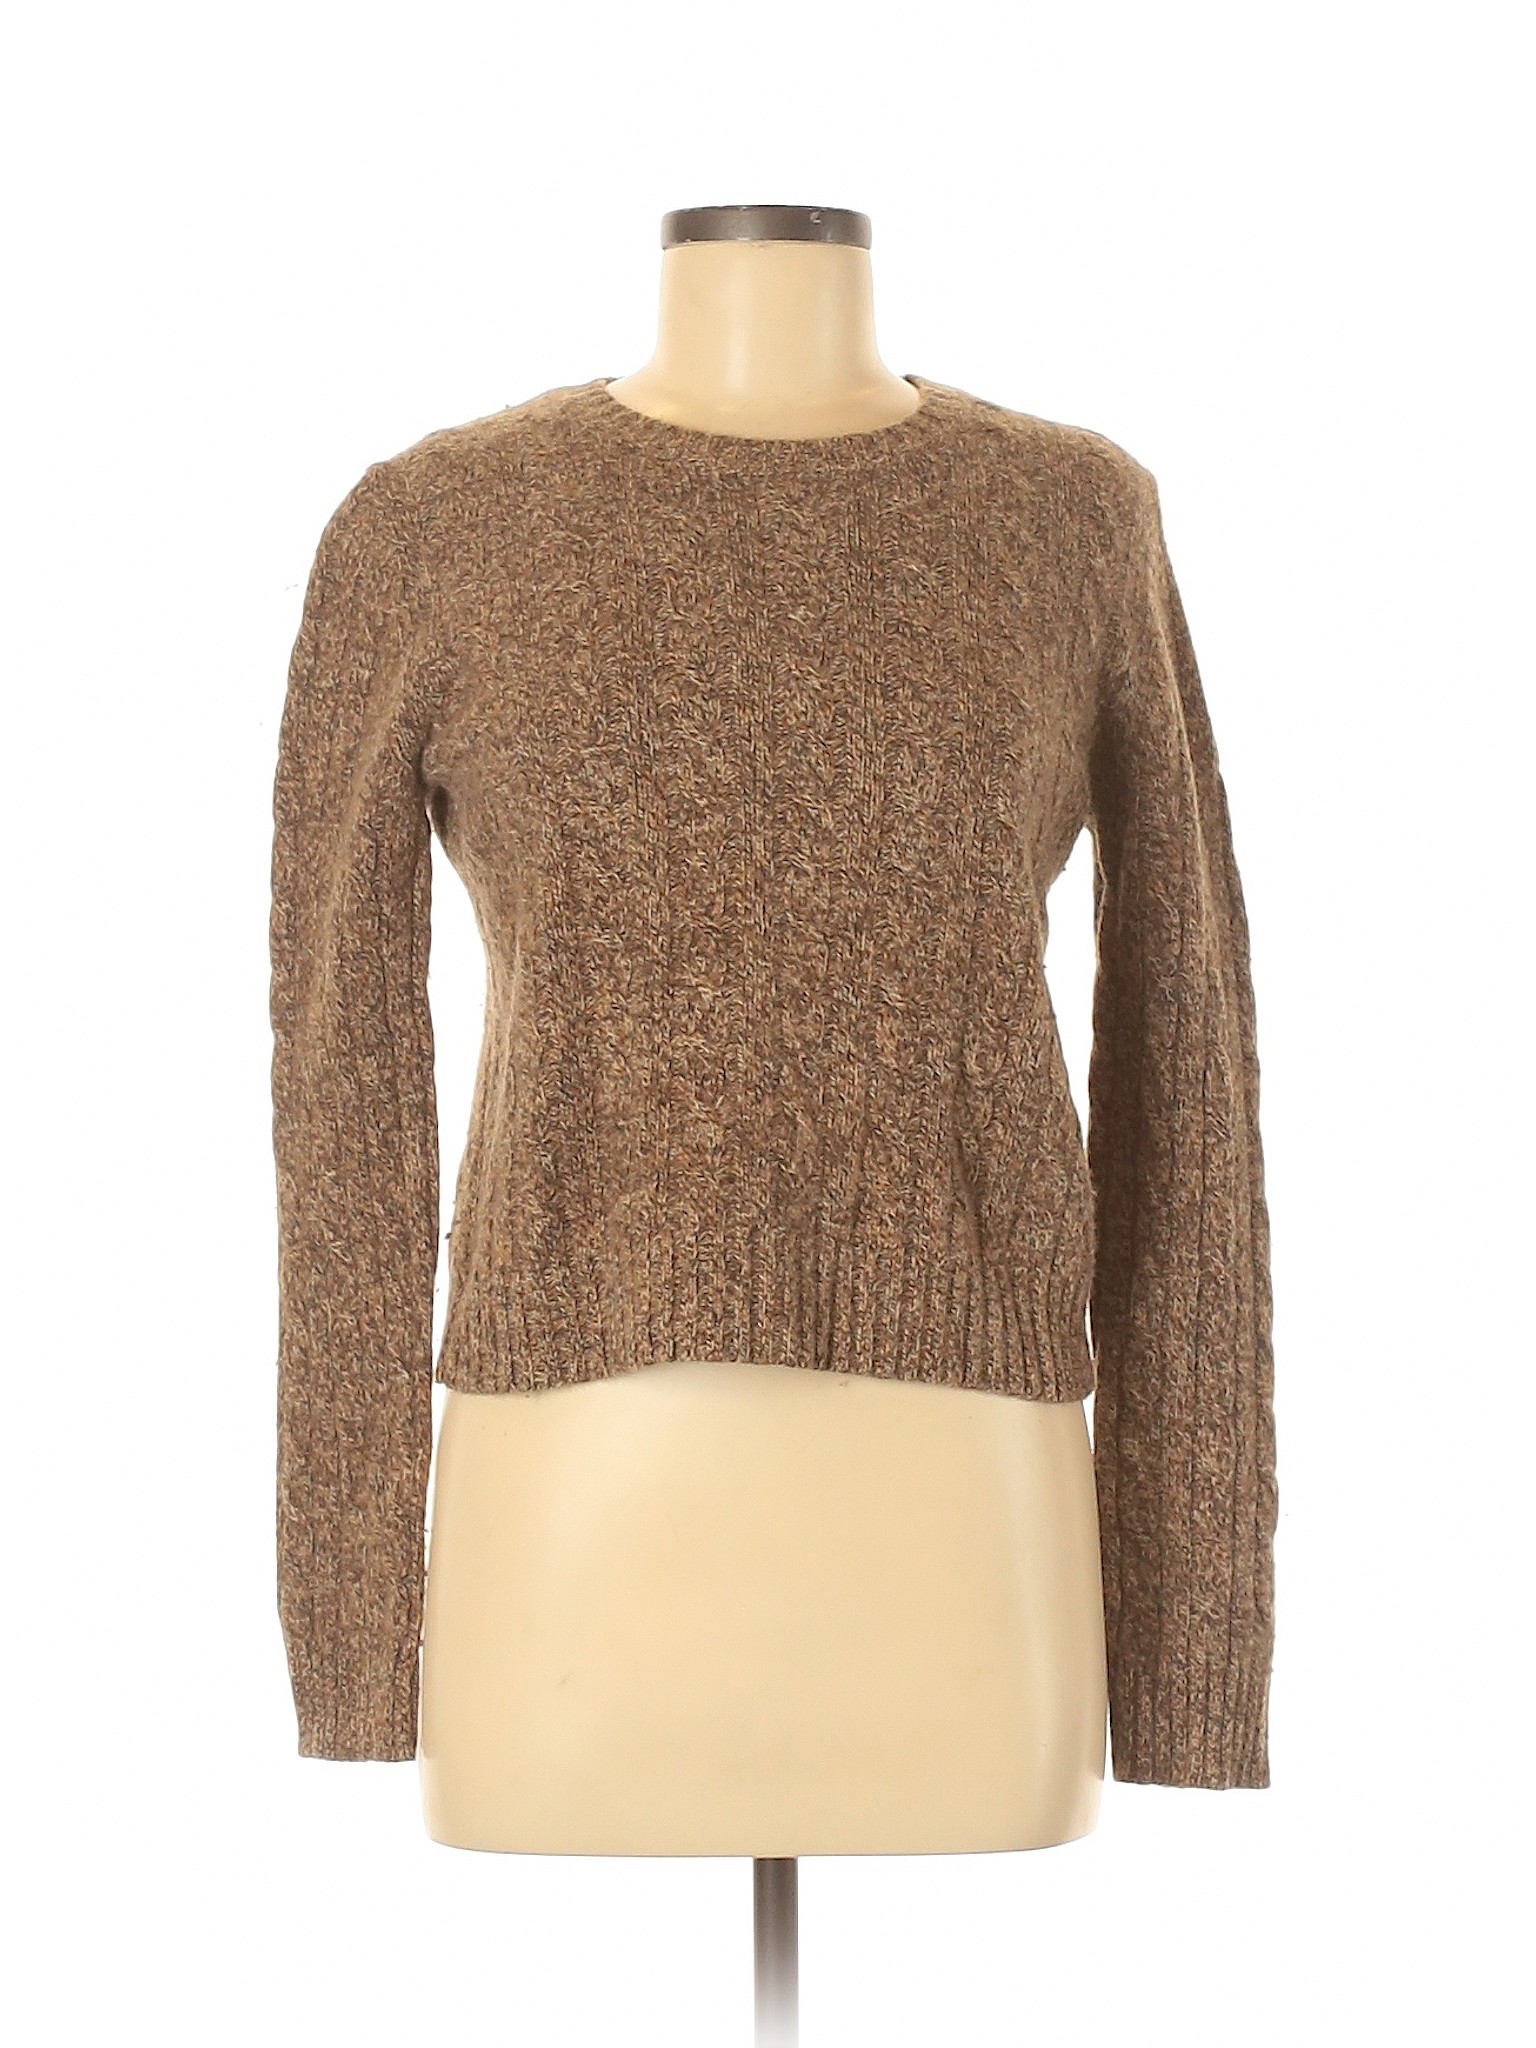 The Limited Women Brown Pullover Sweater L | eBay